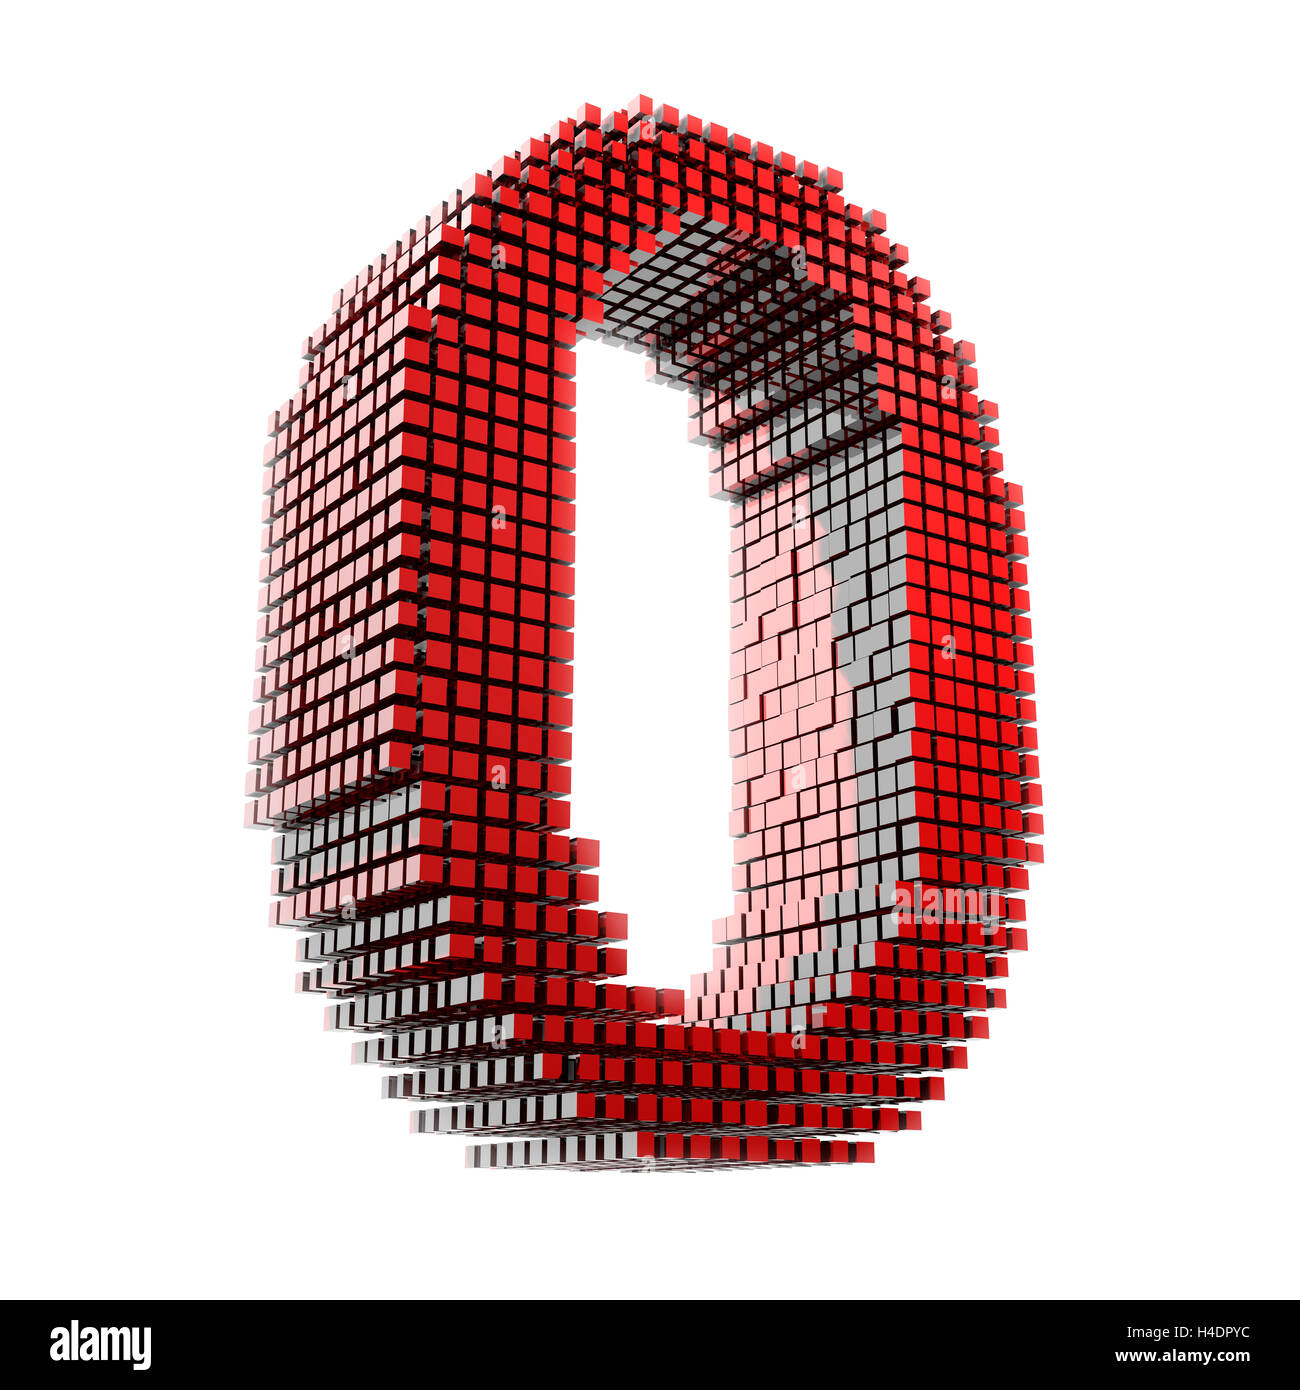 3D-digit zero in red material fragments digitally in front of white Hntergrund Stock Photo